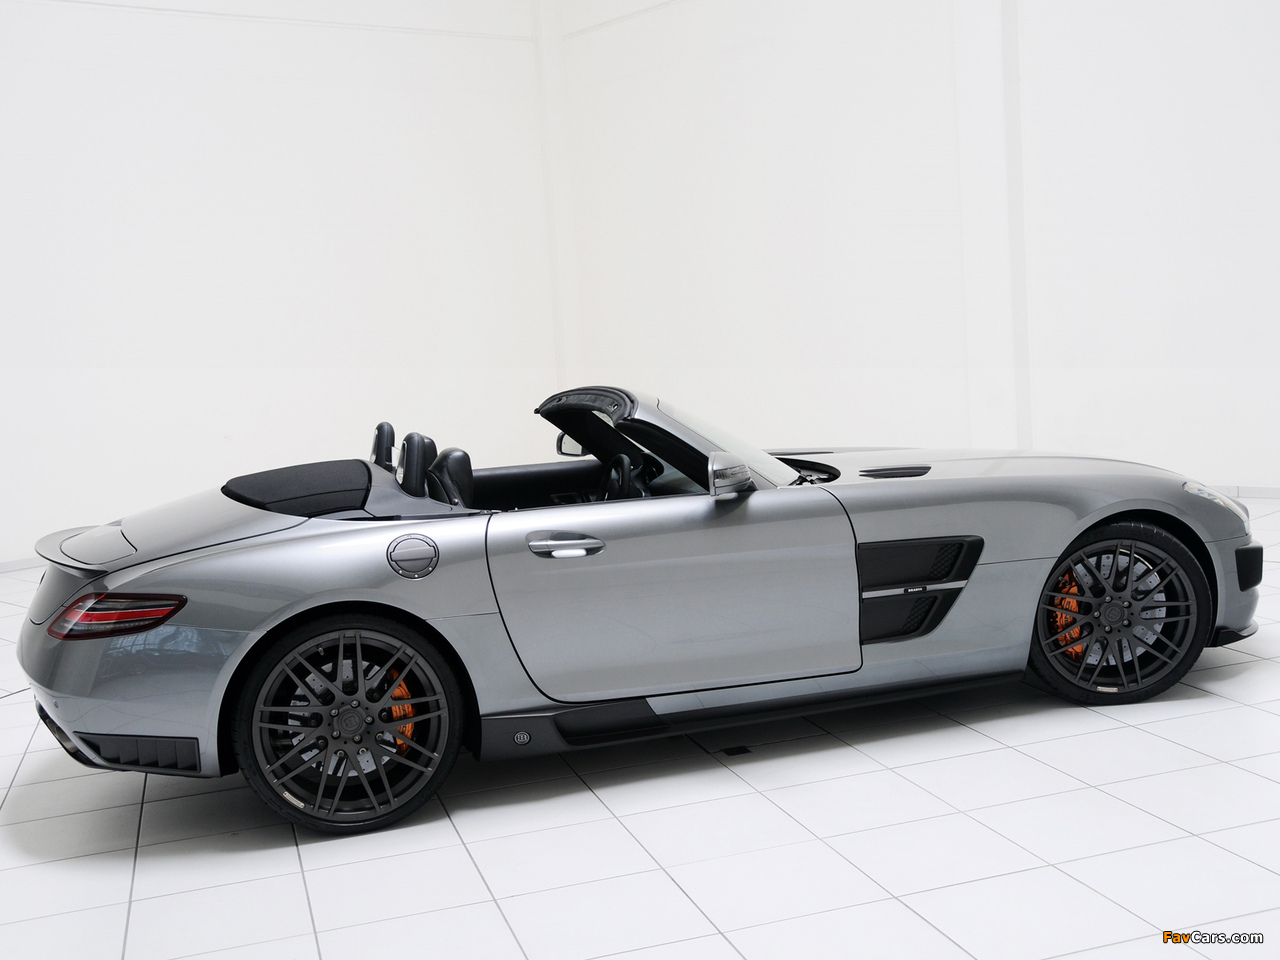 Brabus Mercedes-Benz SLS 63 AMG Roadster (R197) 2011 pictures (1280 x 960)